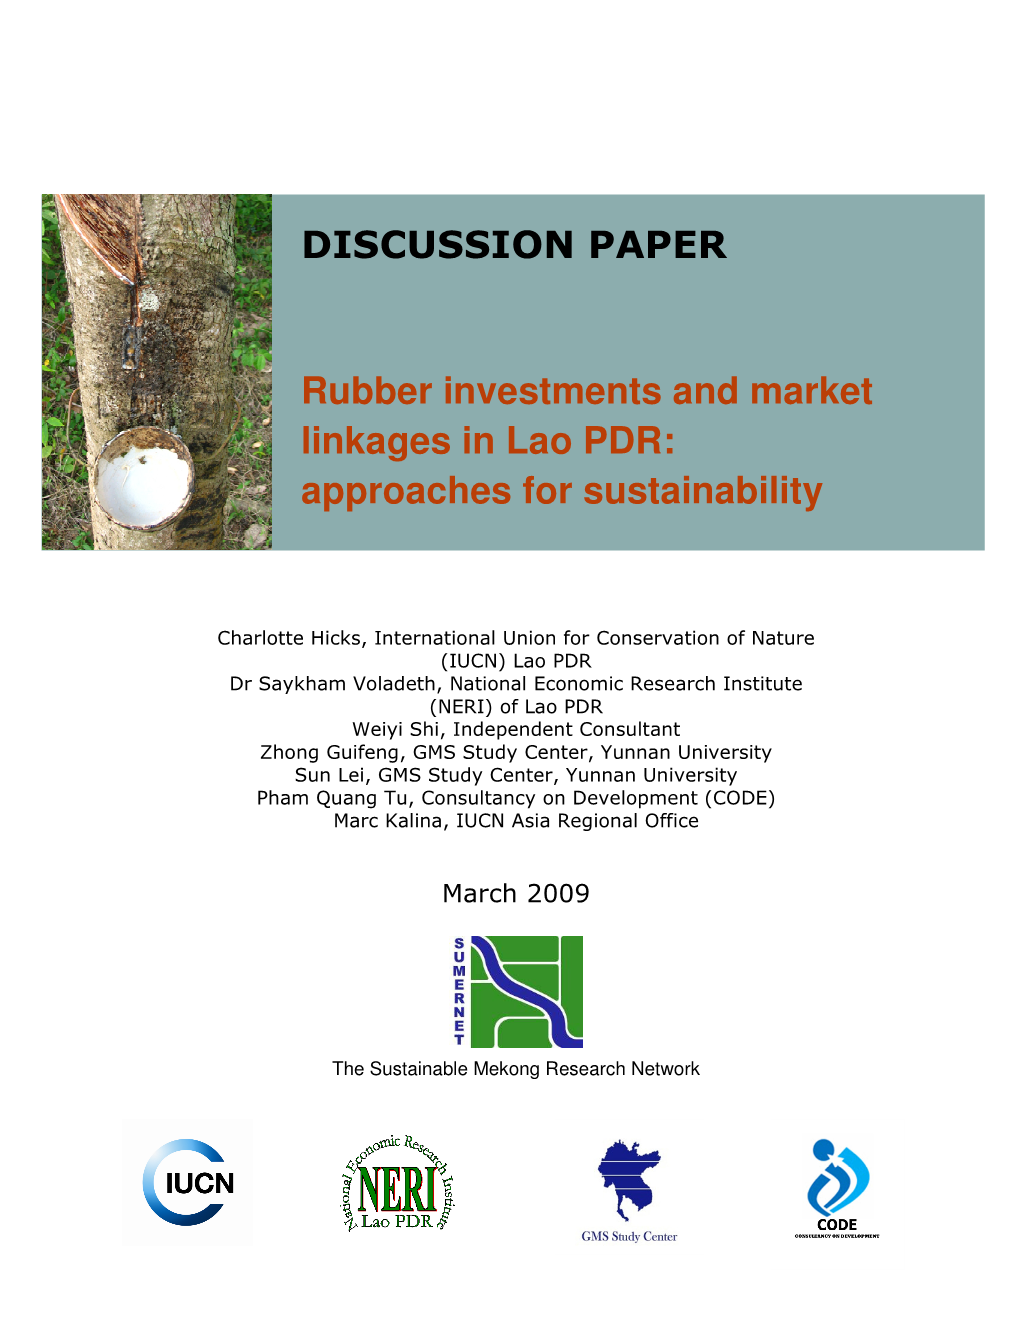 Rubber Investments and Market Linkages in Lao PDR: Approaches for Sustainability